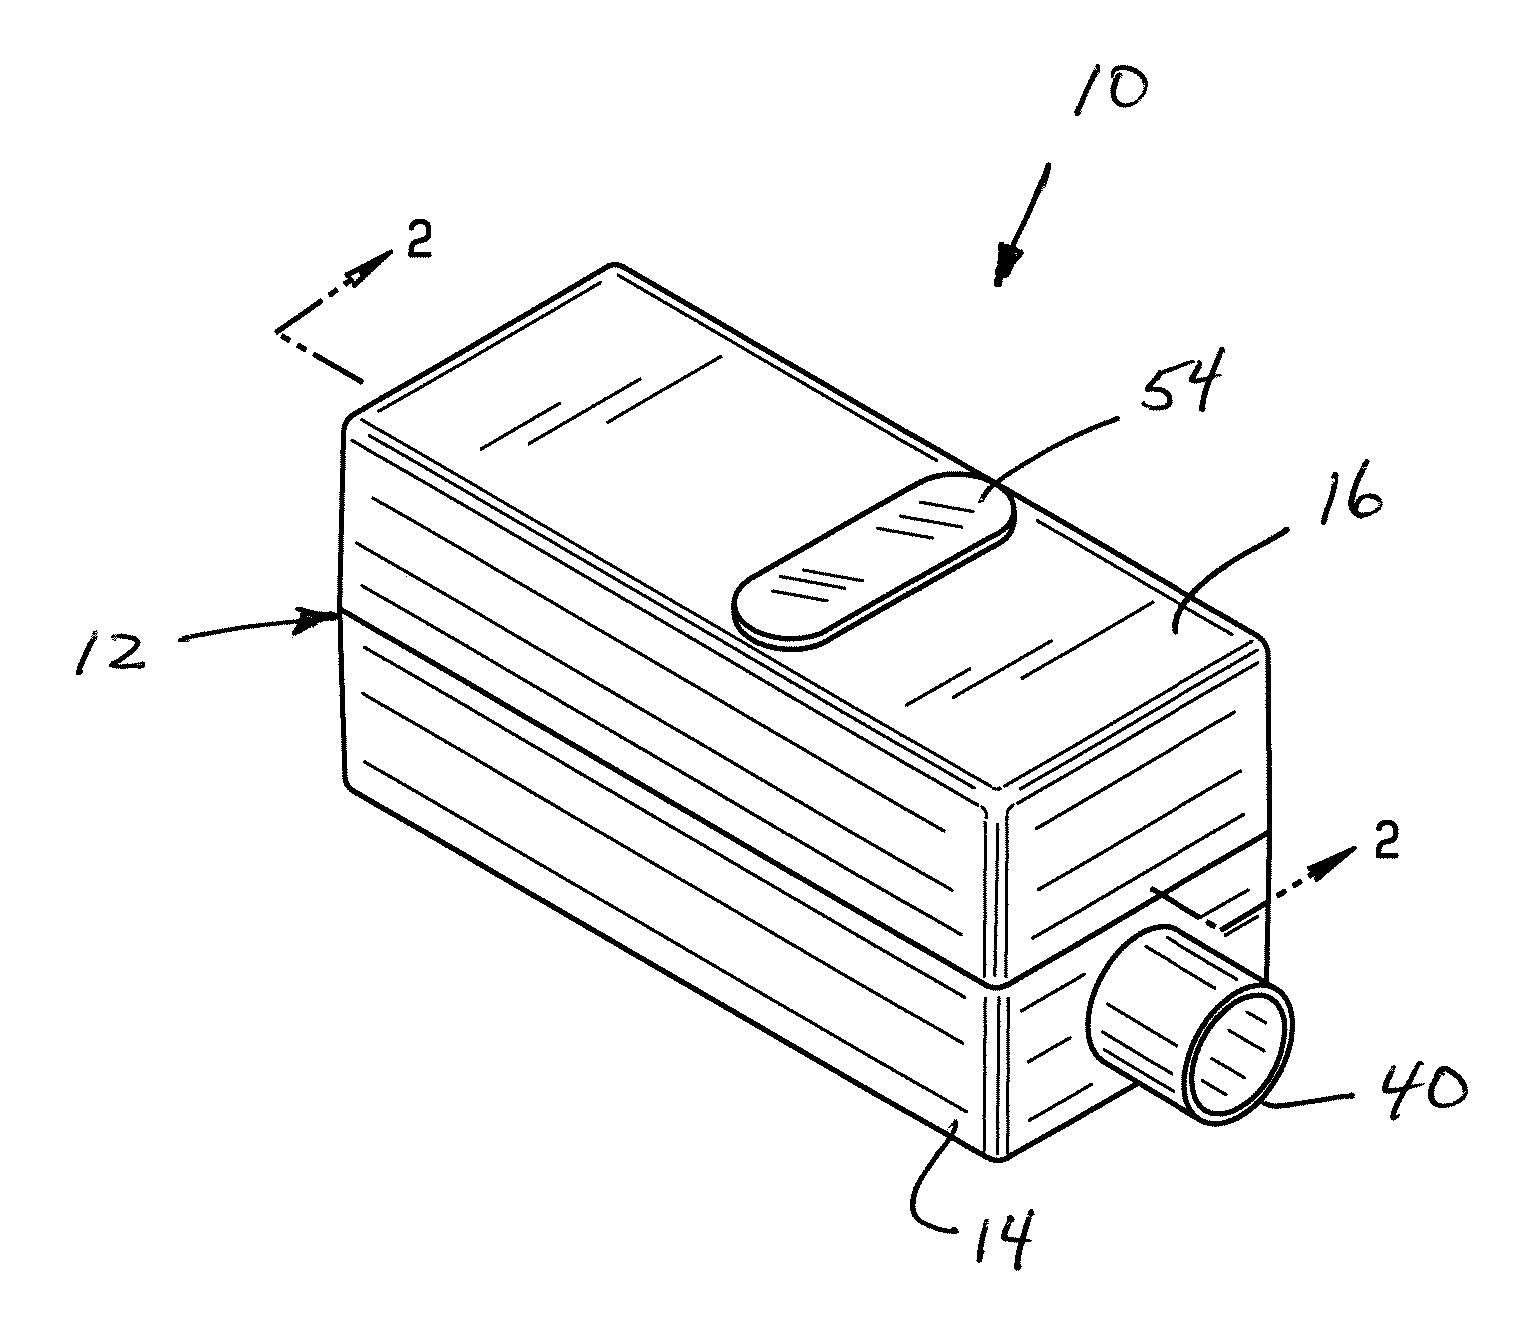 Filter assembly with noise attenuation